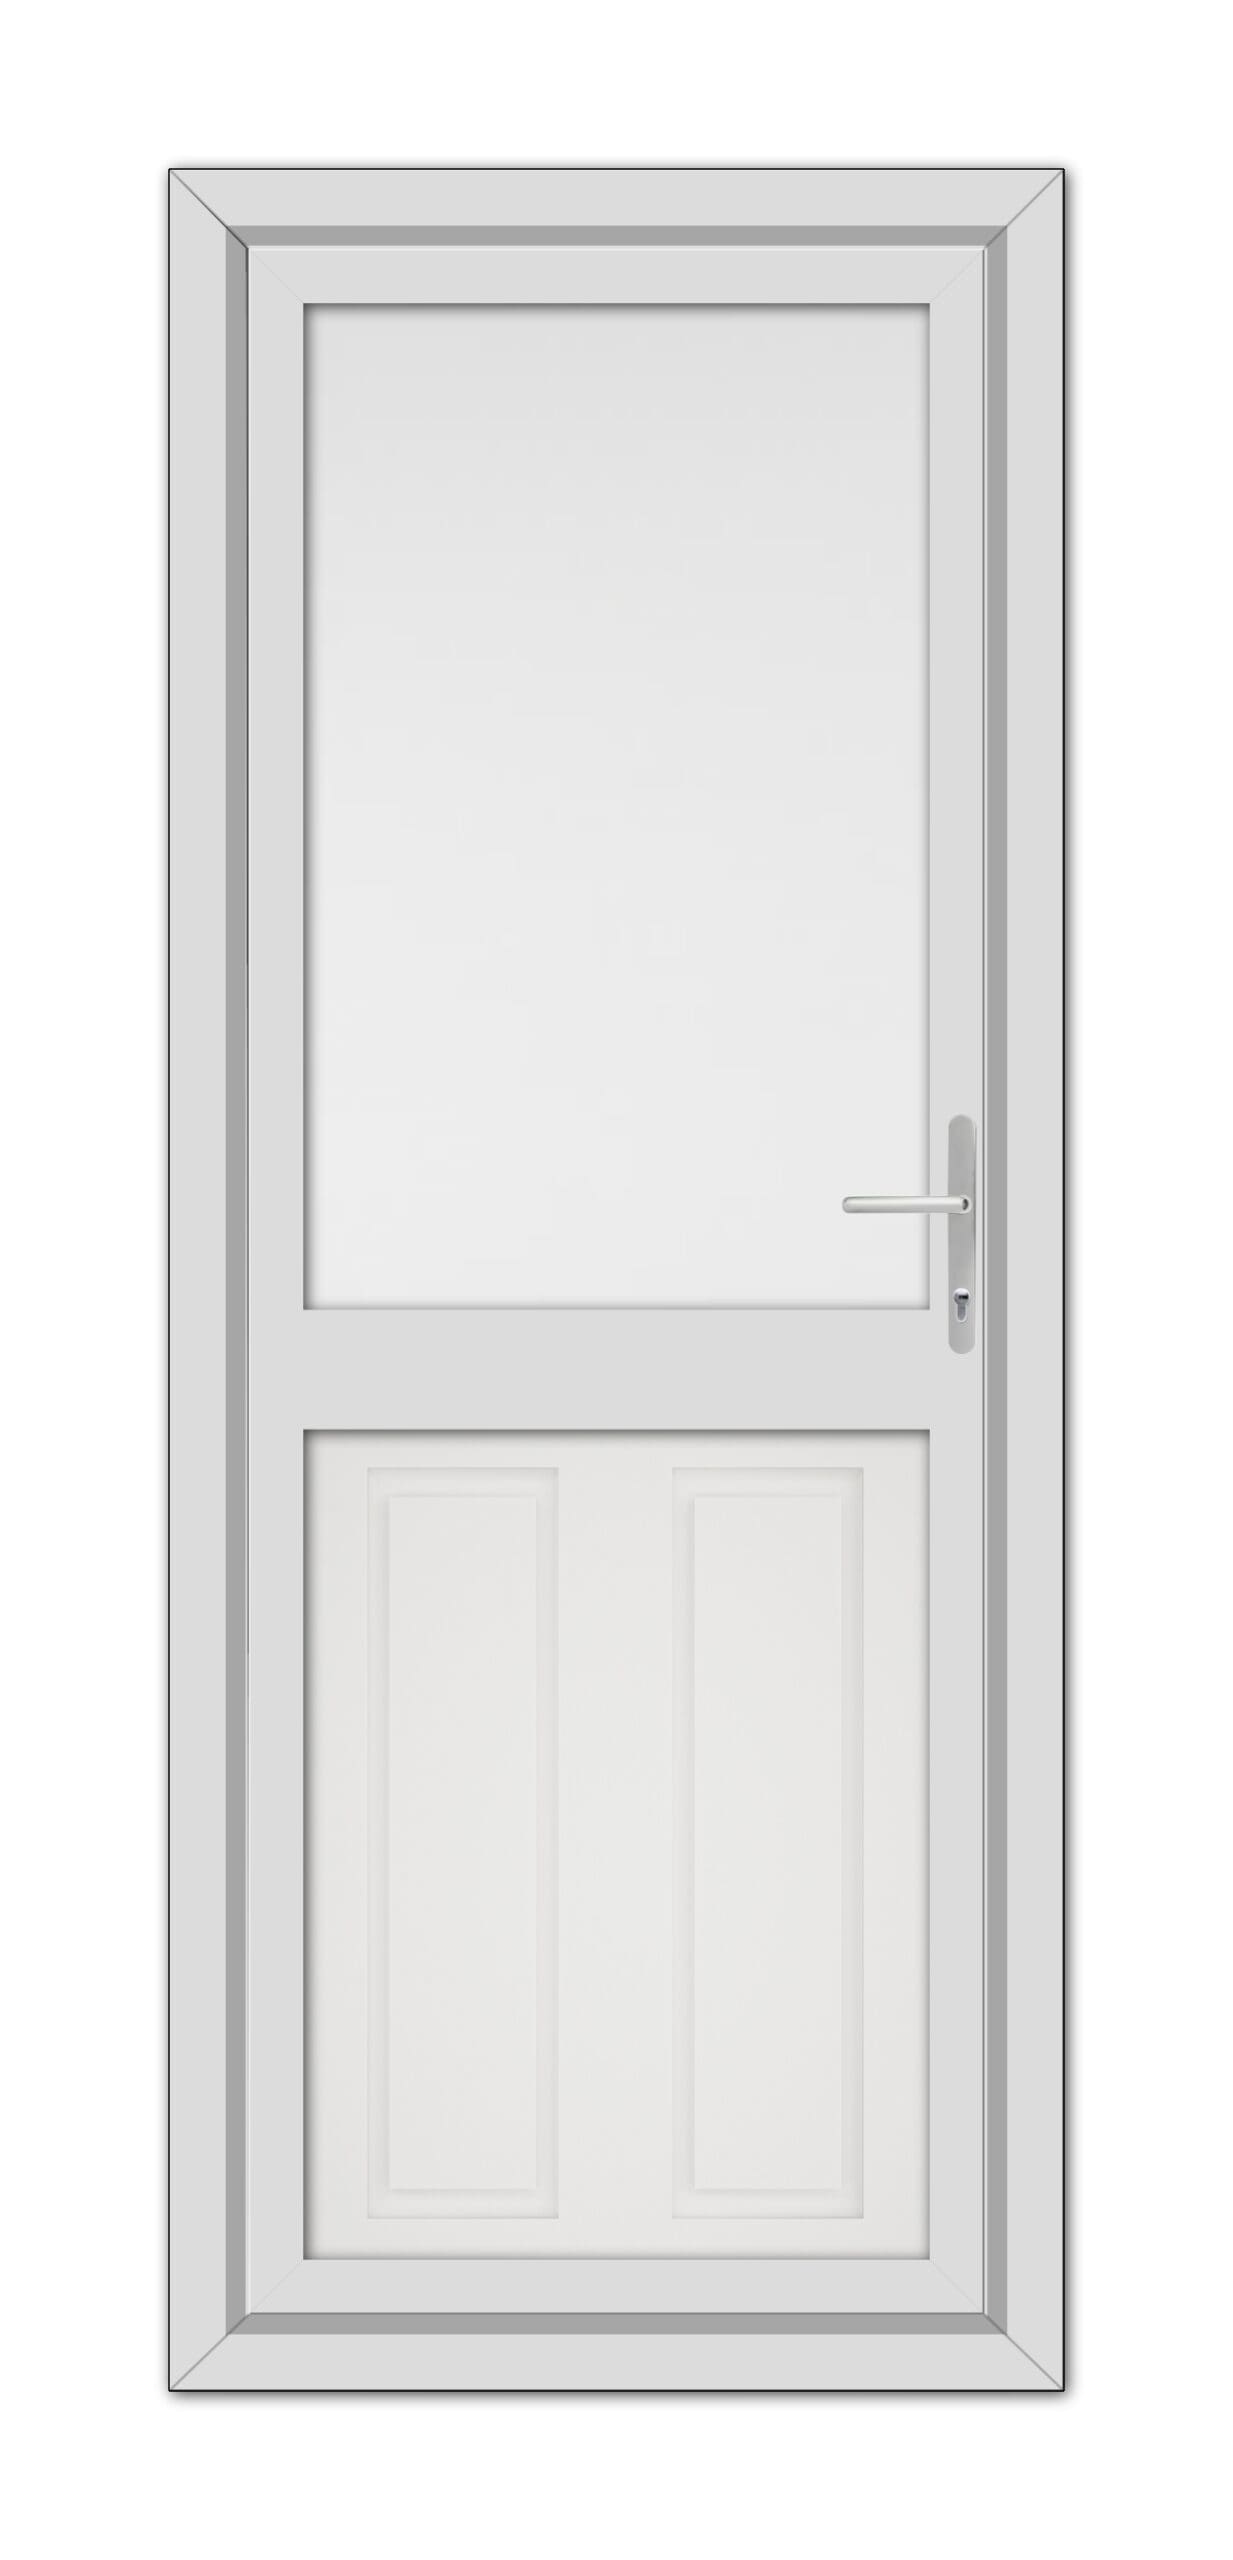 A closed White Manor Half uPVC Back Door with a small rectangular window on the top half and a metallic handle on the right side, set within a simple frame.